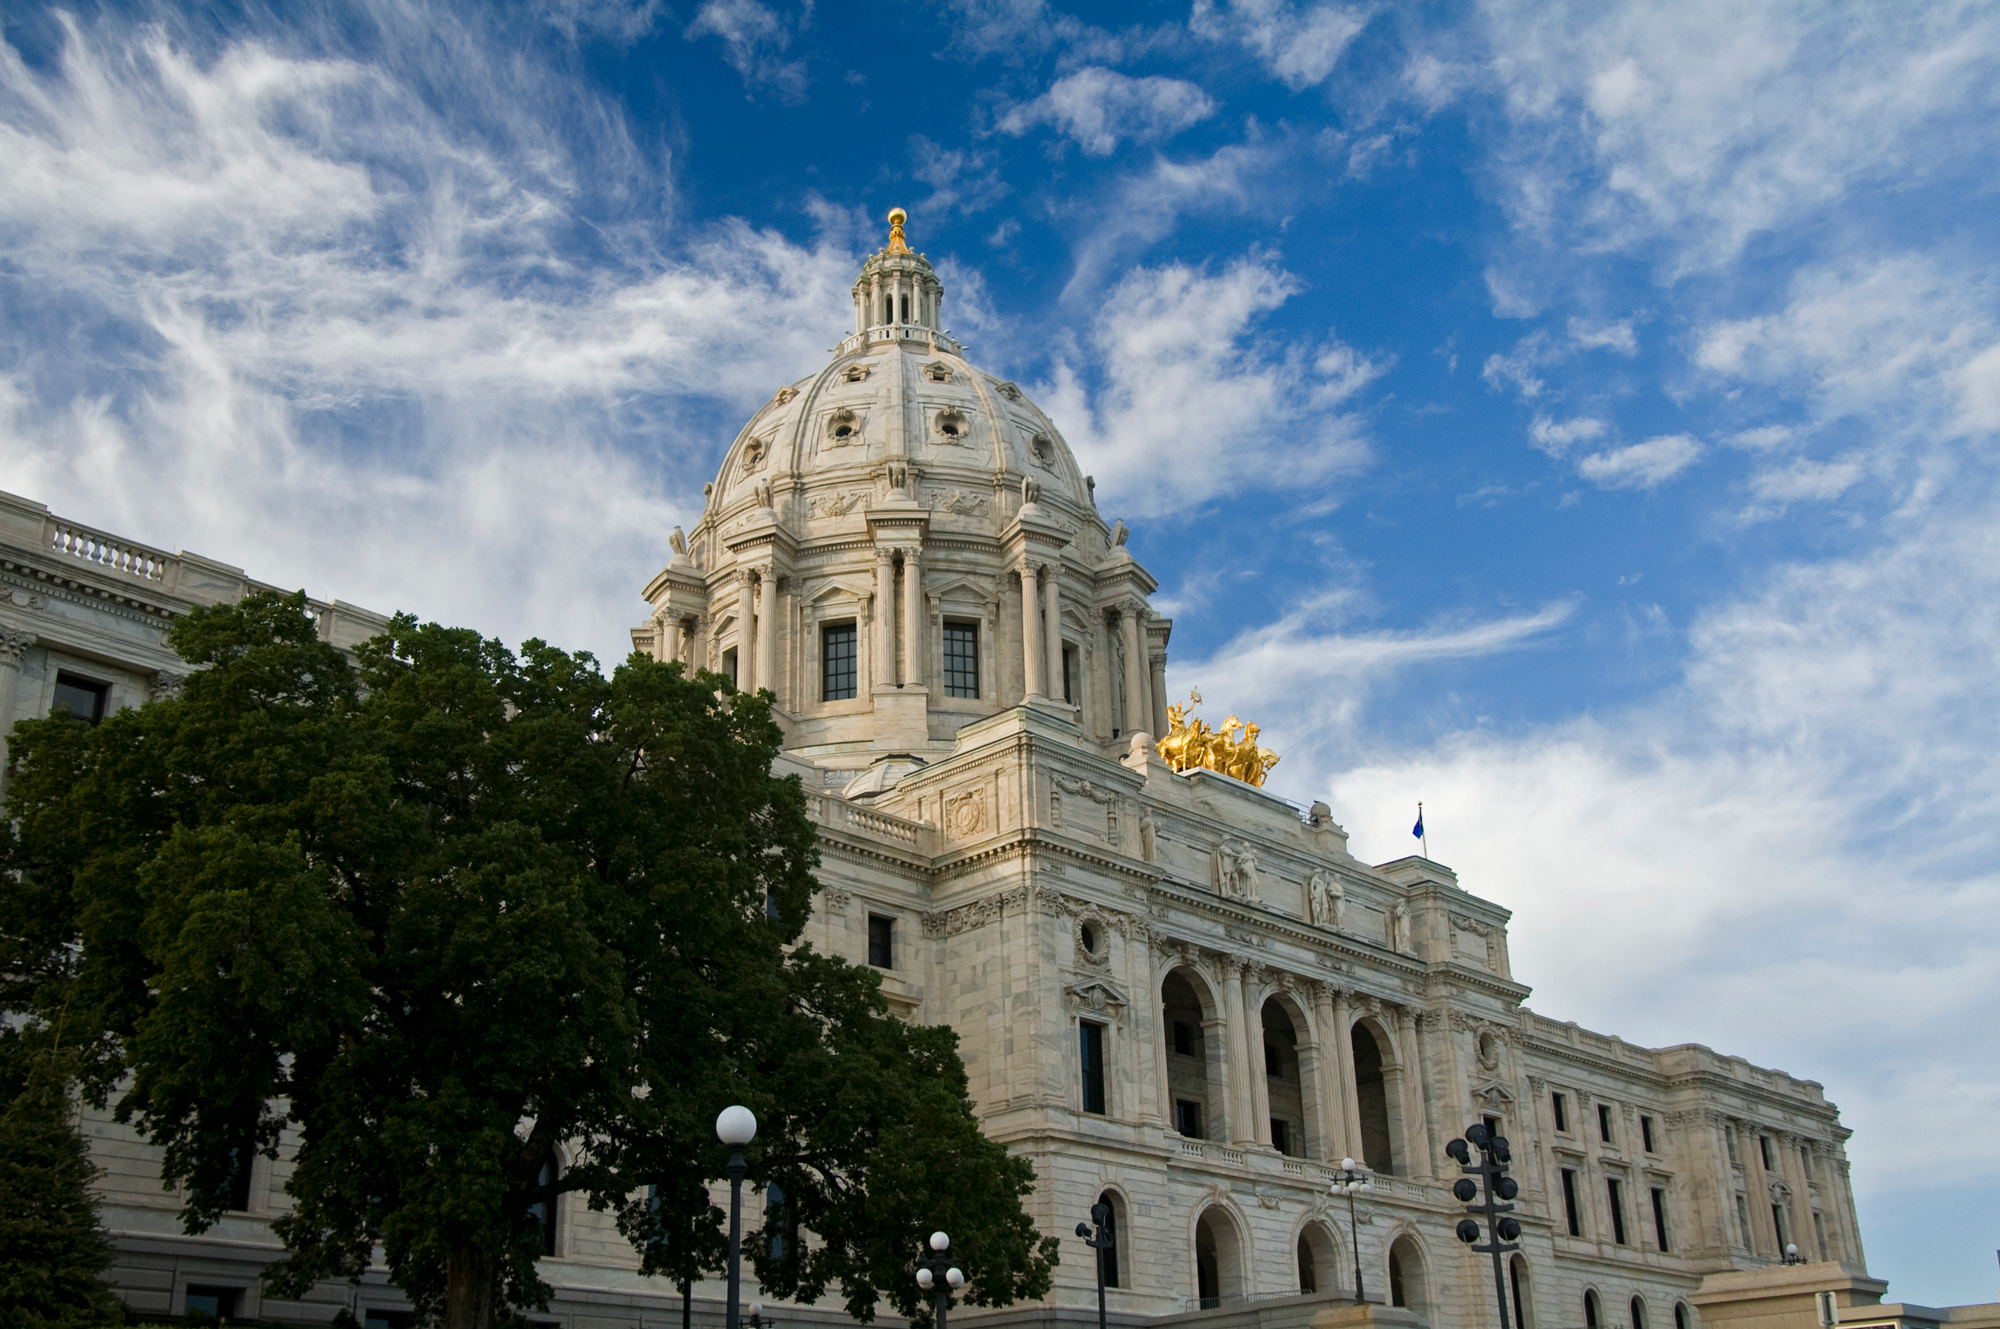 View of MN capitol building from front yard.